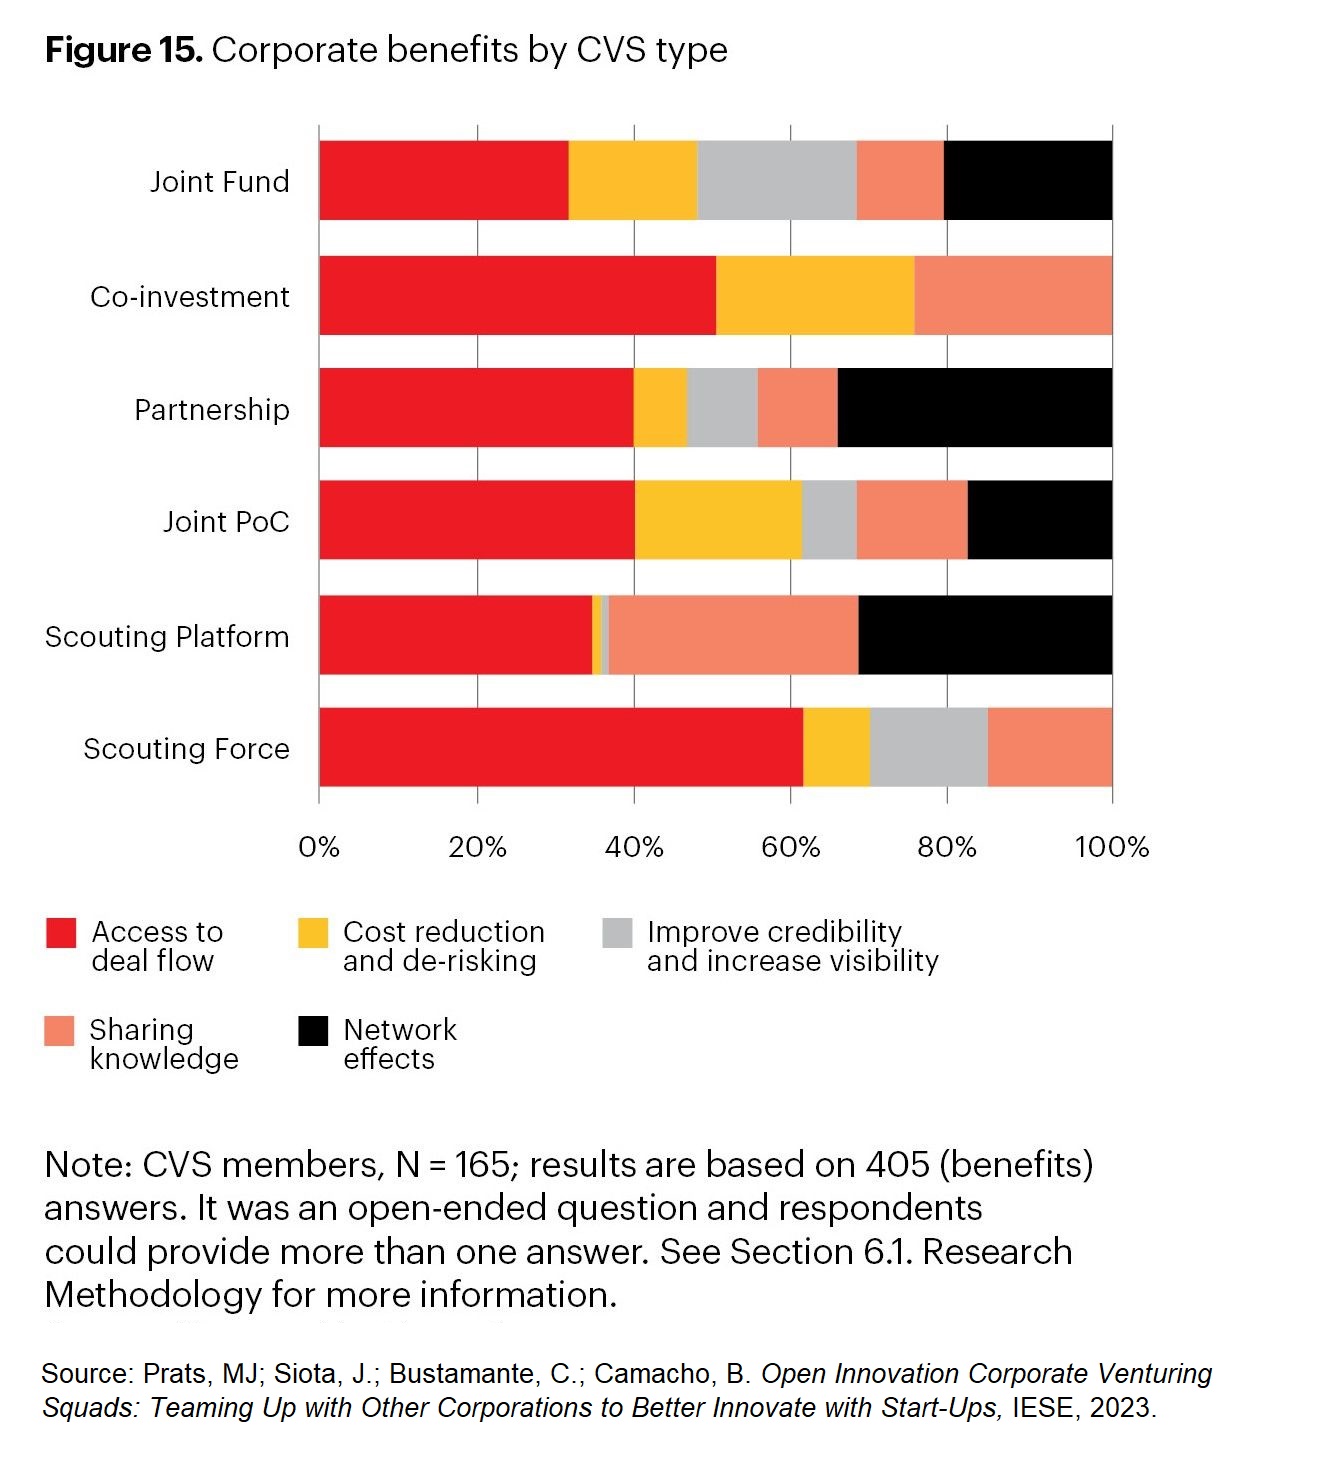 Bar chart showing corporate benefits by CVS type Source: Pratts, MJ; Siota, J.; Bustamante, C.; Camacho, B. Open Innovation Corporate Venturing Squads: Teaming Up with Other Corporations to Better Innovate with Start-Ups, IESE, 2023.